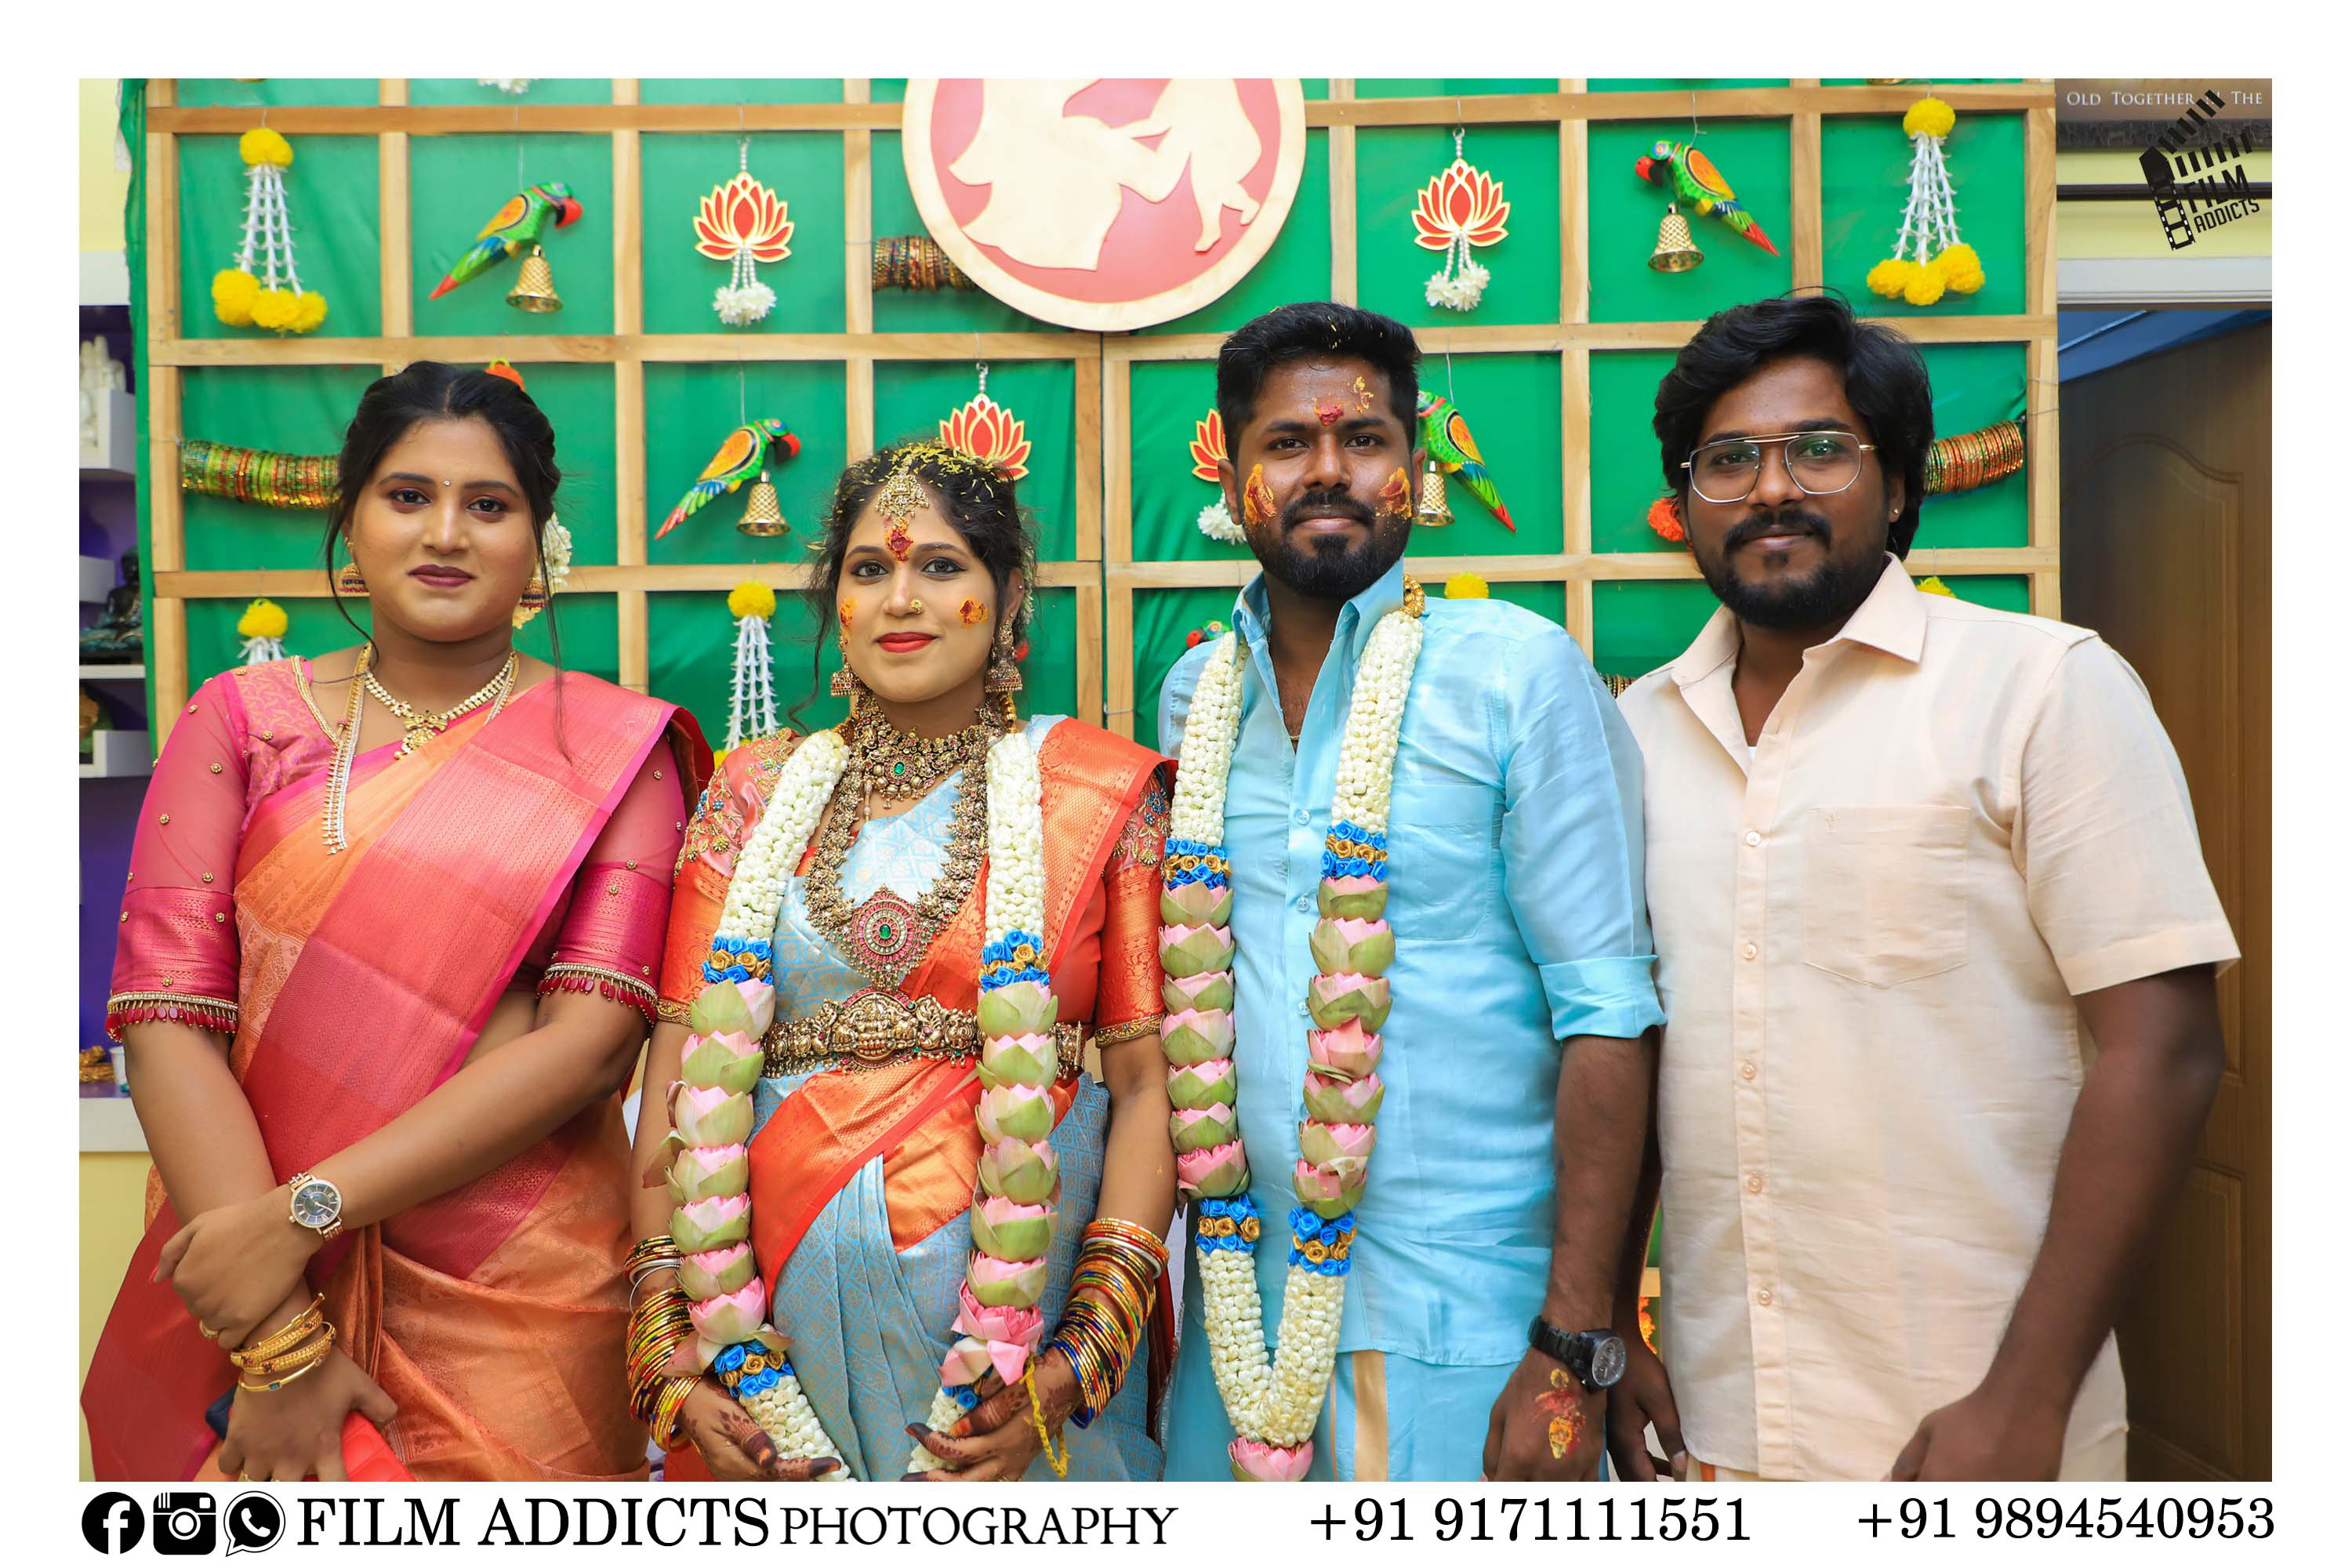 Best Baby Shower Photography in Thanjavur-FilmAddicts Photography,best Wedding photographers in Thanjavur,best candid photographers in Thanjavur,best Wedding photography in Thanjavur,best candid photography in Thanjavur, Best Wedding candid Photographers in Thanjavur, best marriage photographers in Thanjavur,best marriage photography in Thanjavur,best photographers in Thanjavur,best photography in Thanjavur,best Wedding candid photography in Thanjavur,best Wedding video in Thanjavur,best Wedding videographers in Thanjavur,best Wedding videography in Thanjavur,best candid videographers in Thanjavur,best candid videography in Thanjavur,best marriage videographers in Thanjavur,best marriage videography in Thanjavur,best videographers in Thanjavur,best videography in Thanjavur,best Wedding candid videography in Thanjavur,best Wedding candid videographers in Thanjavur,best helicam operators in Thanjavur,best drone operators in Thanjavur,best Wedding studio in Thanjavur,best professional photographers in Thanjavur,best professional photography in Thanjavur,No.1 Wedding photographers in Thanjavur,No.1 Wedding photography in Thanjavur,Thanjavur Wedding photographers,Thanjavur Wedding photography,Thanjavur Wedding videos,best candid videos in Thanjavur,best candid photos in Thanjavur,best helicam operators photography in Thanjavur,best helicam operator photographers in Thanjavur,best Wedding videography in Thanjavur.